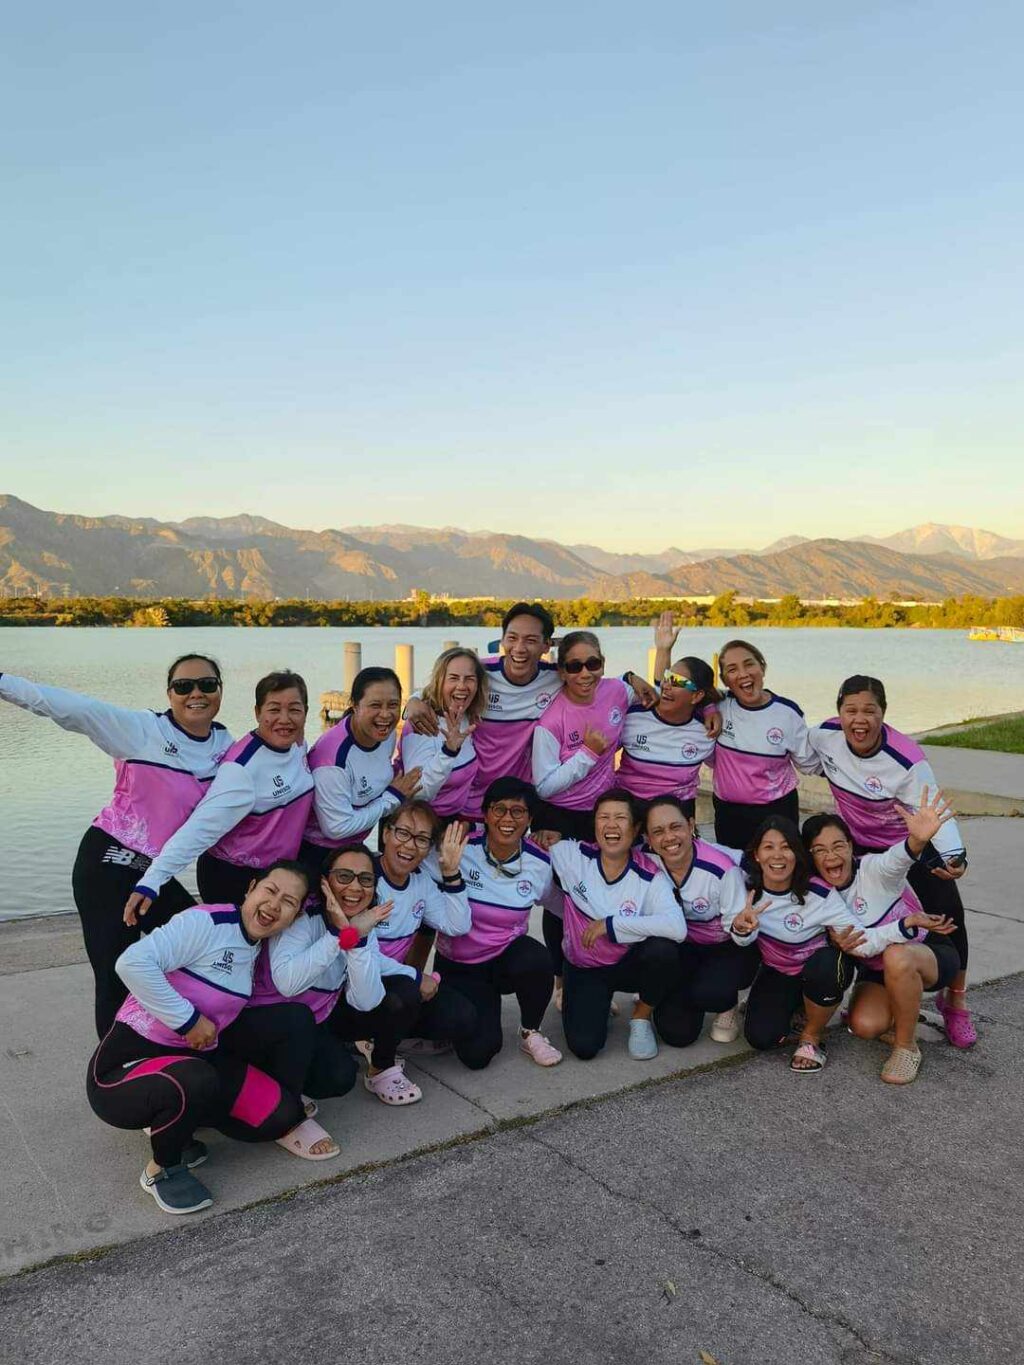  The Cebu Pink Paddlers dragon boat team take time for a group photo during the  Santa Fe Dam Dragon Boat Festival 2023 in Irwindale, California, United States. | Contributed photo